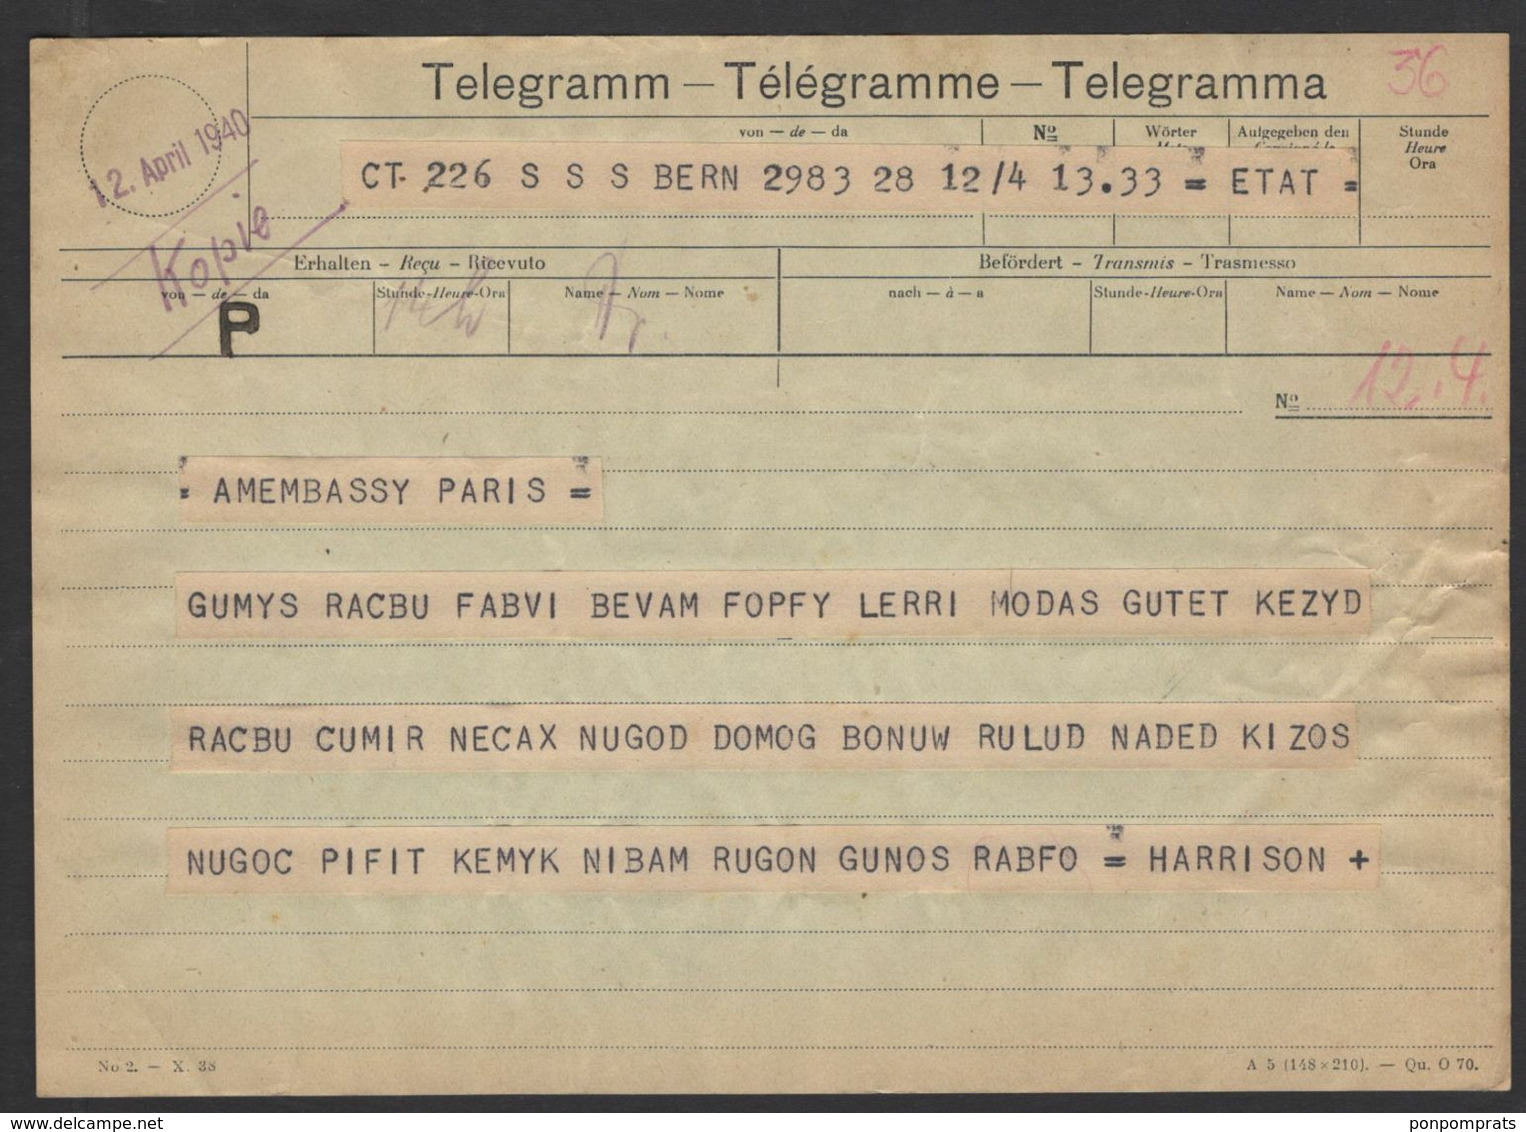 Second World War: Code Telegram From The British Legation In Bern For AMEMBASSY PARIS Avril 1940 - Documenti Storici